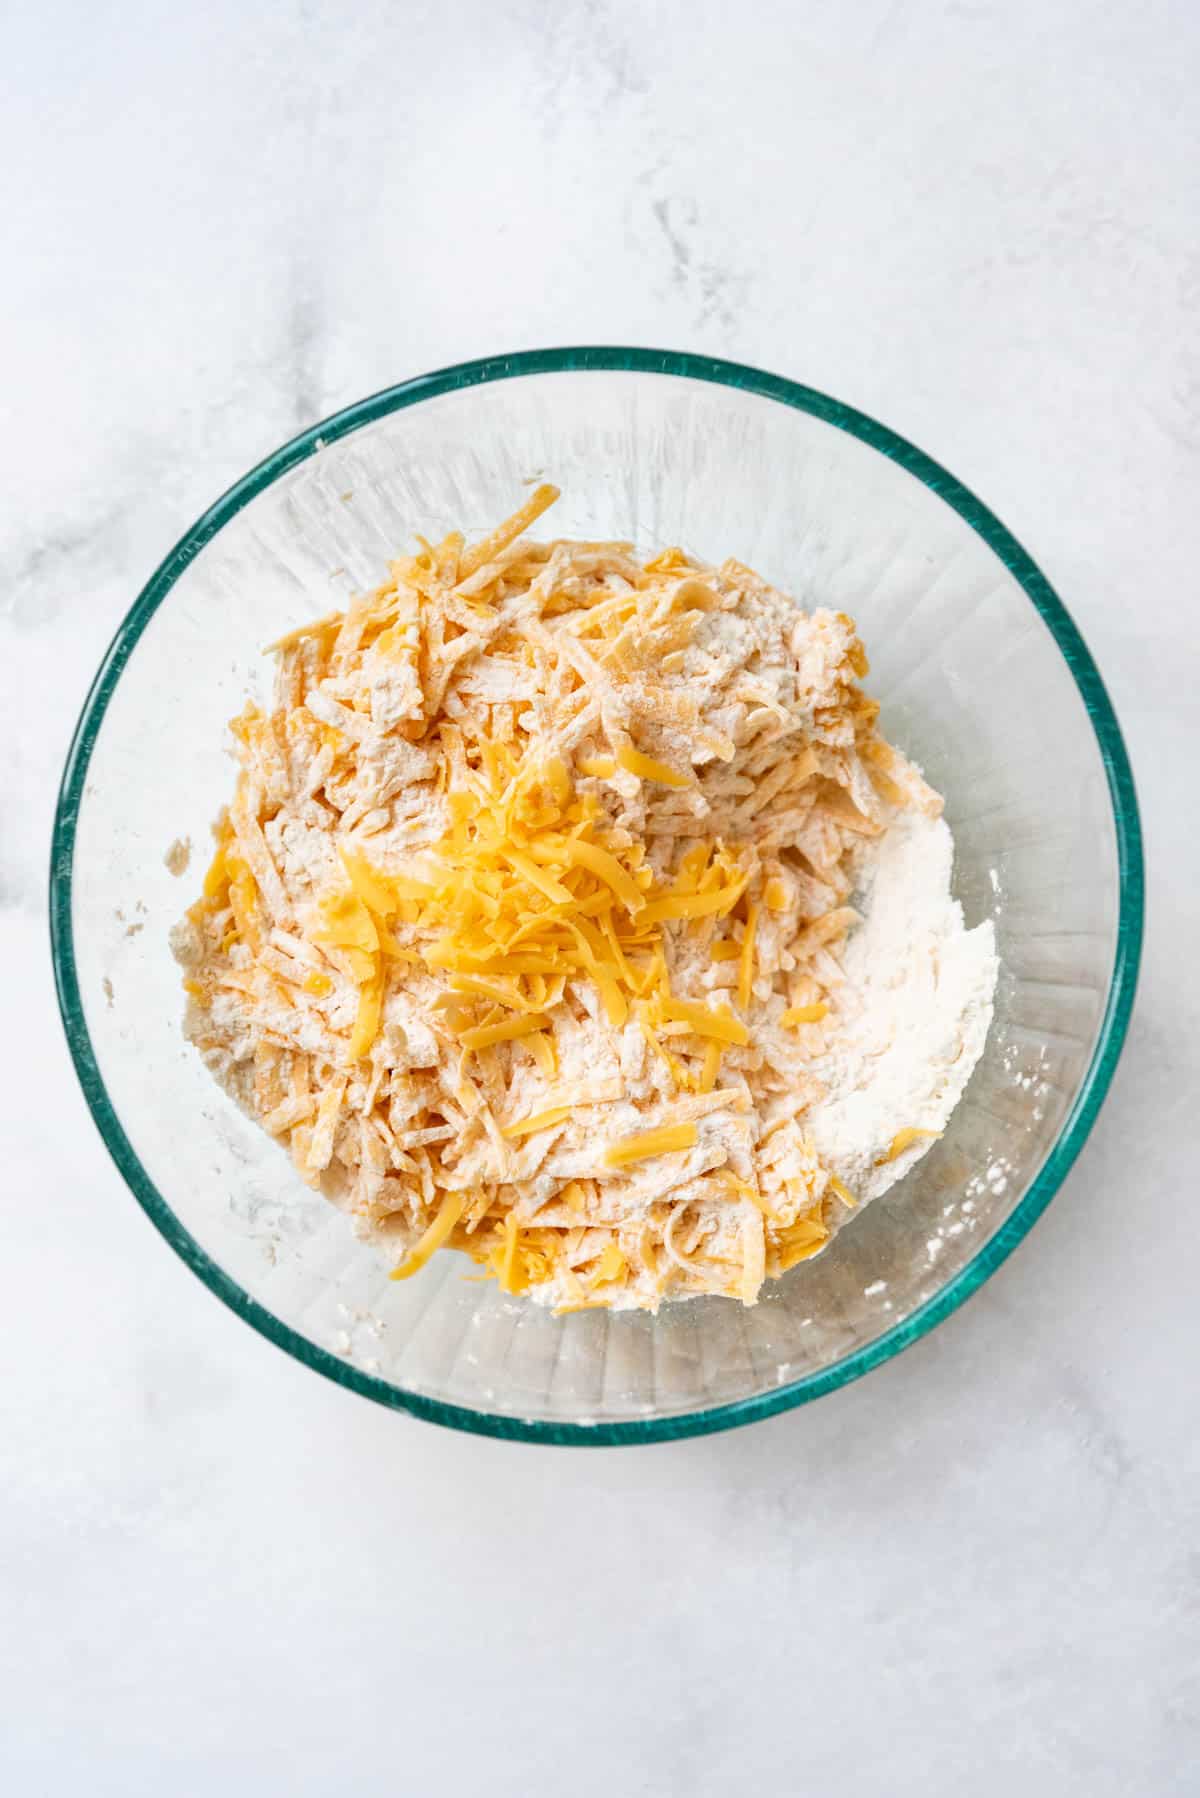 Combining grated cheese with flour, baking powder, baking soda, and salt in a large mixing bowl.